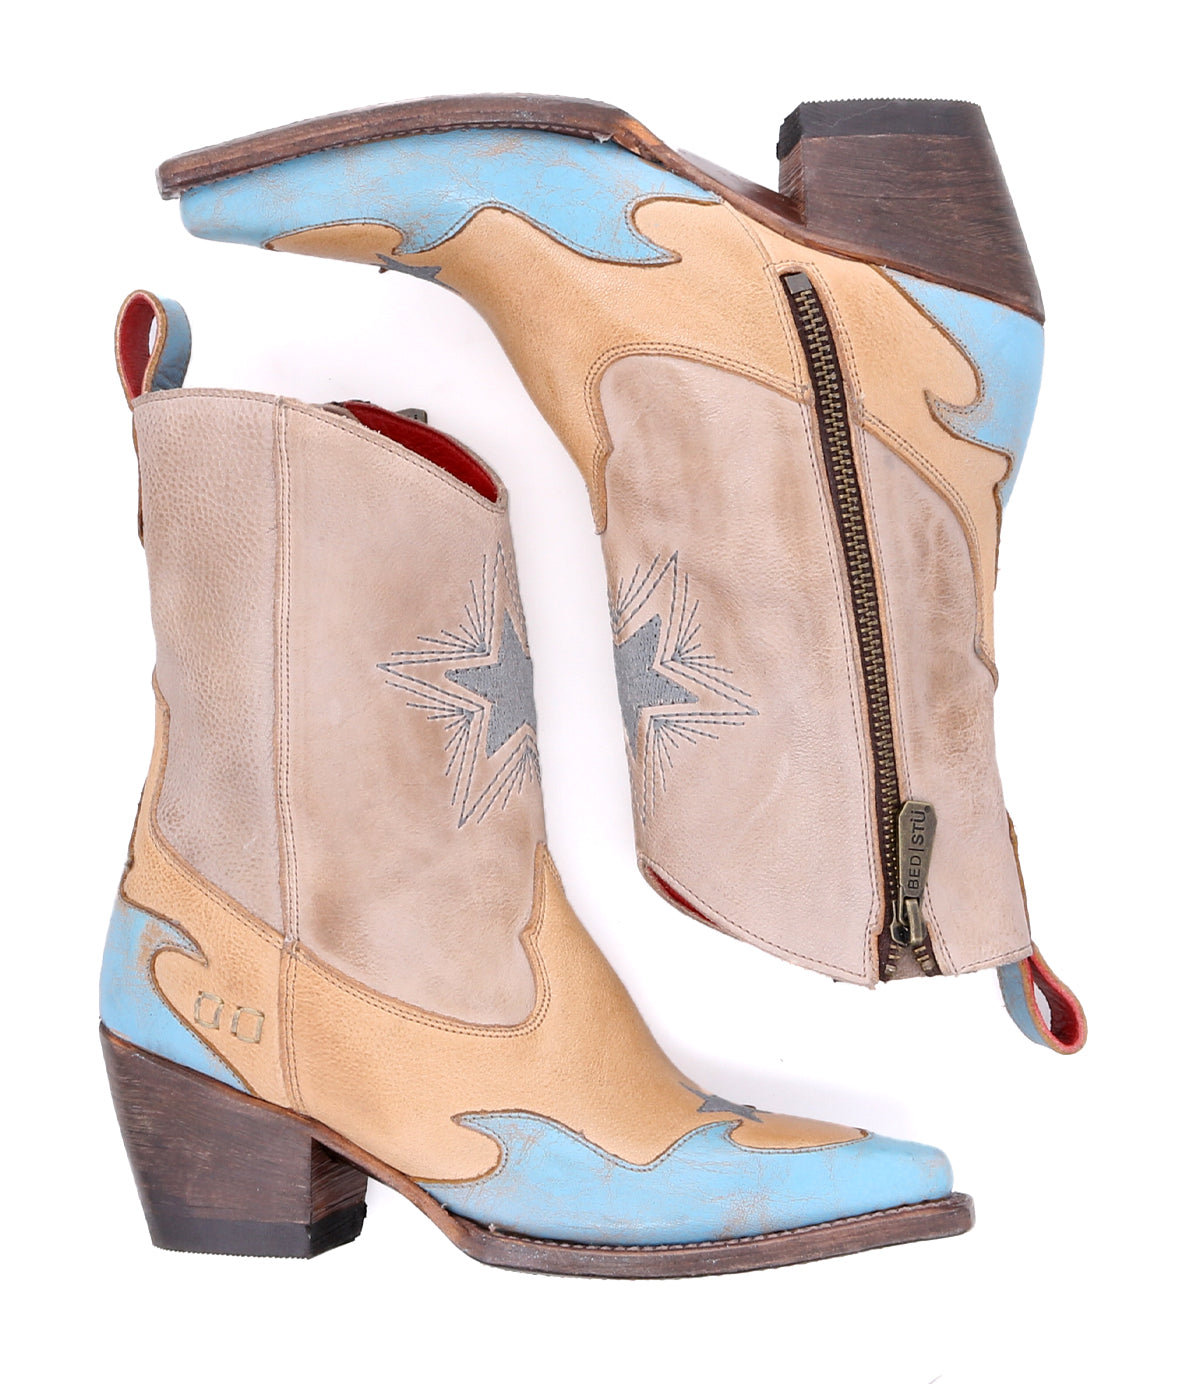 A pair of artfully handcrafted Hyperspeed cowboy boots by Bed Stu in beige and blue.